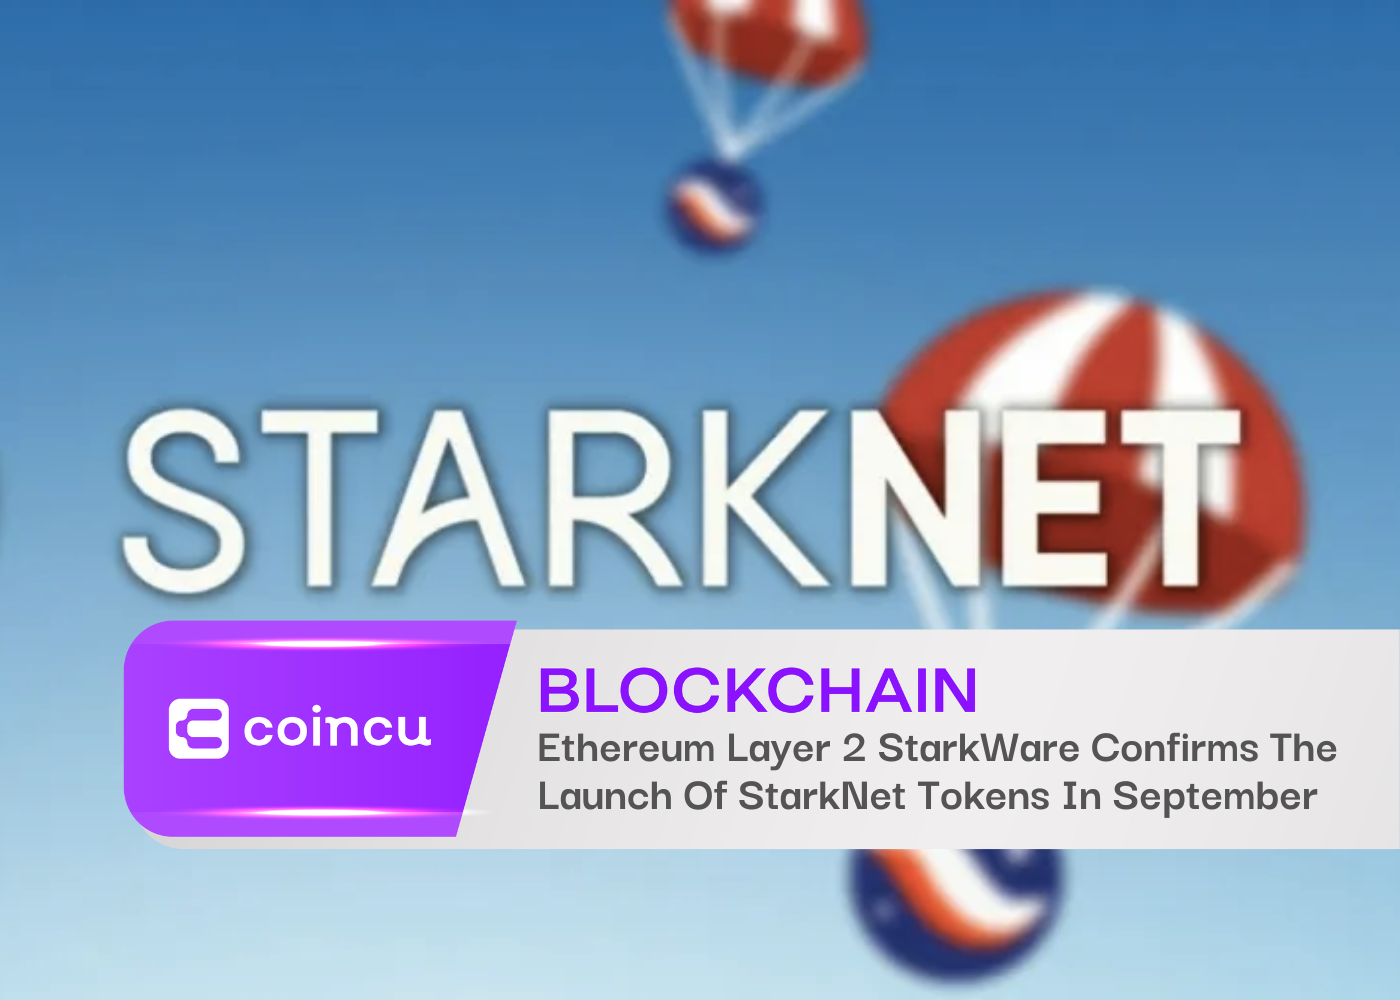 Ethereum Layer 2 StarkWare Confirms The Launch Of StarkNet Tokens In September